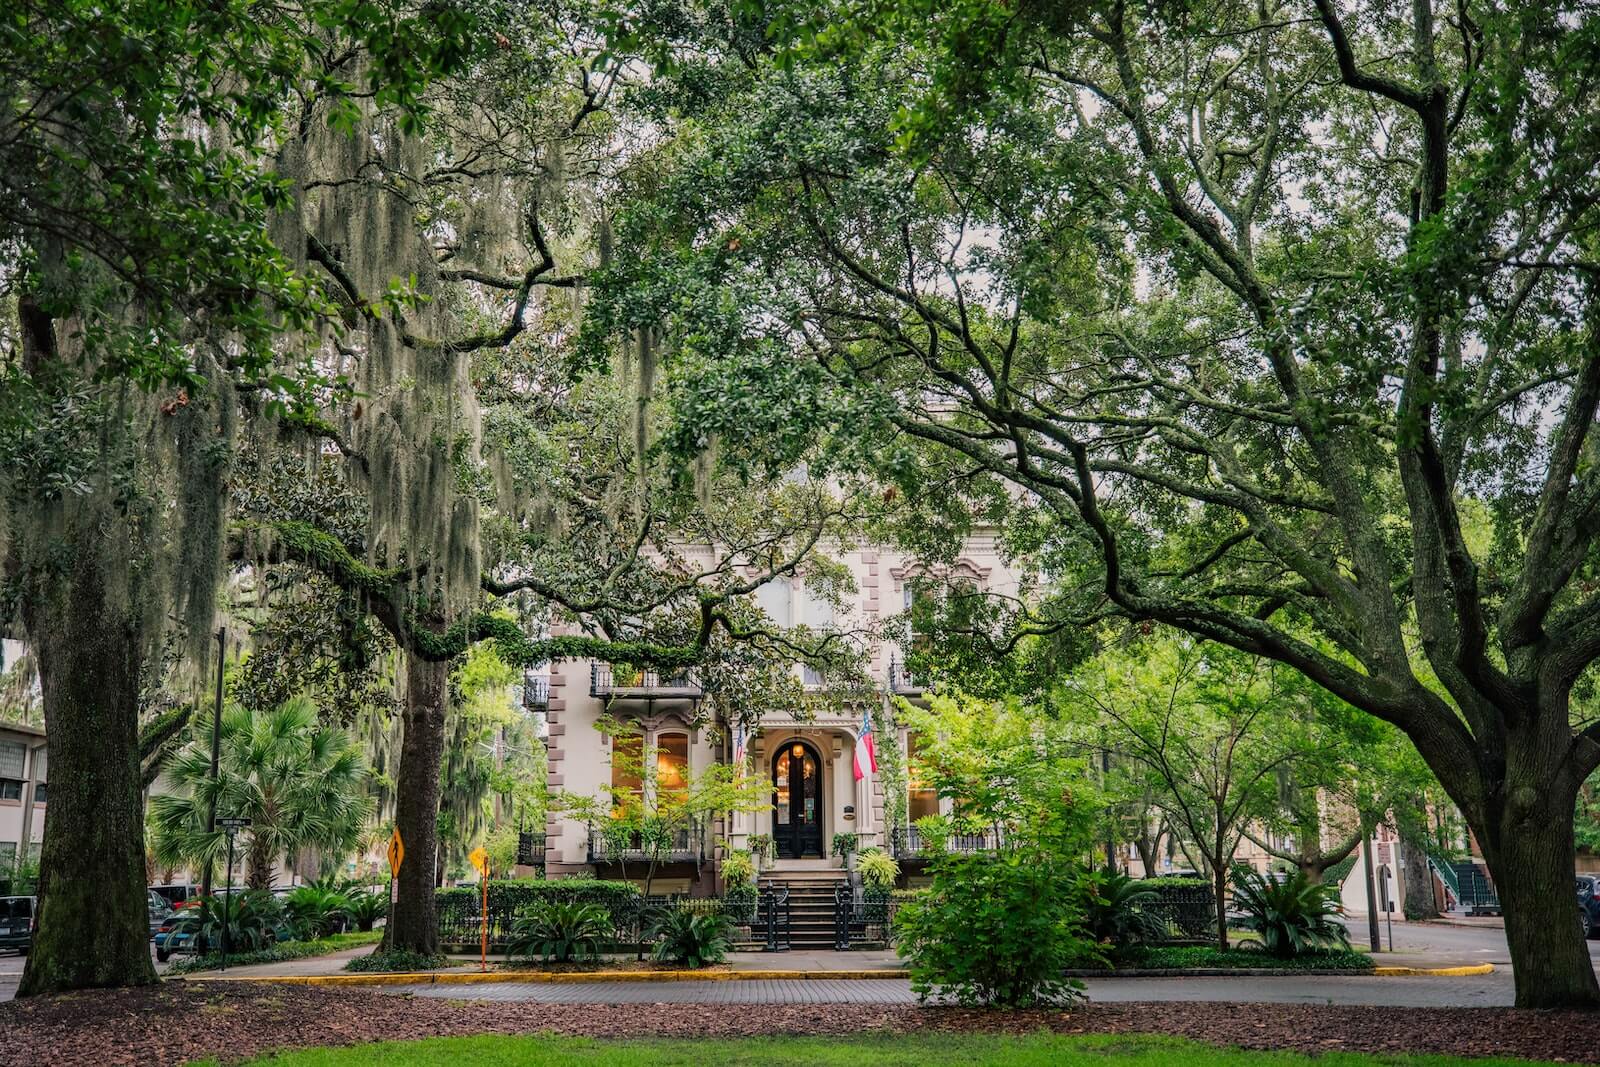 A home in Savannah surrounded by Spanish Moss trees